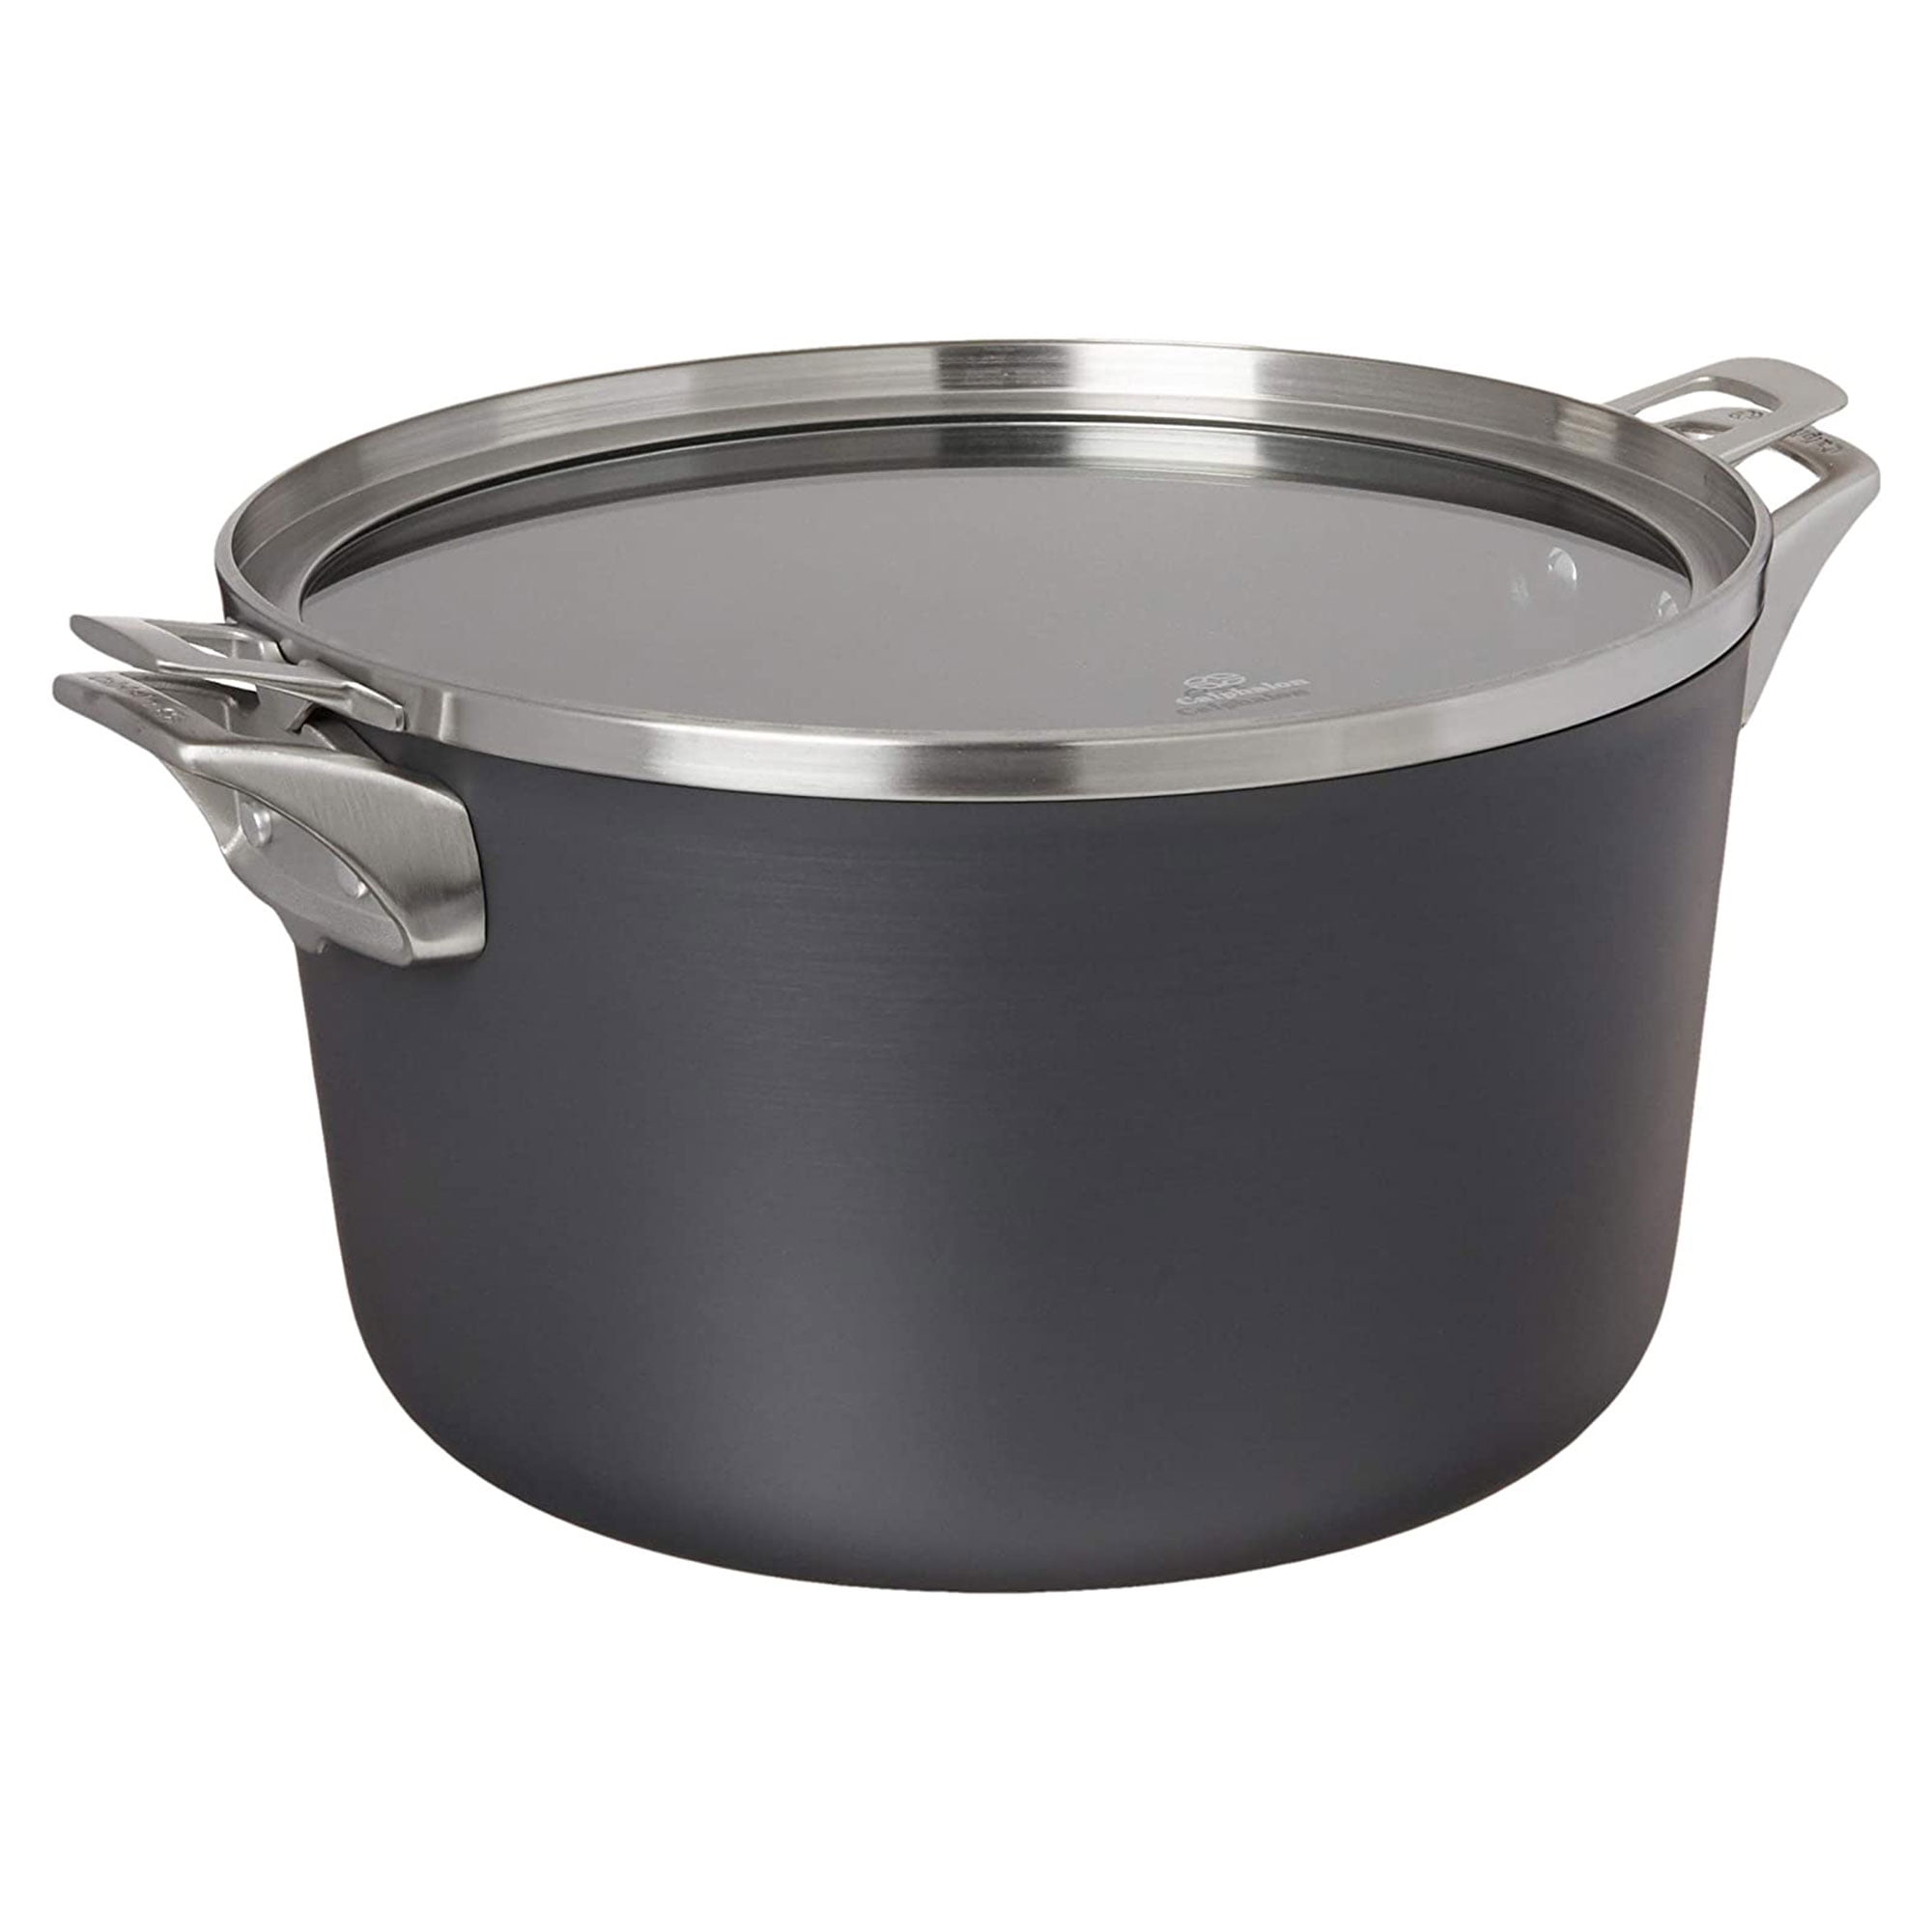 Calphalon Premier Stainless Steel 6 Quart Stock Pot with Cover